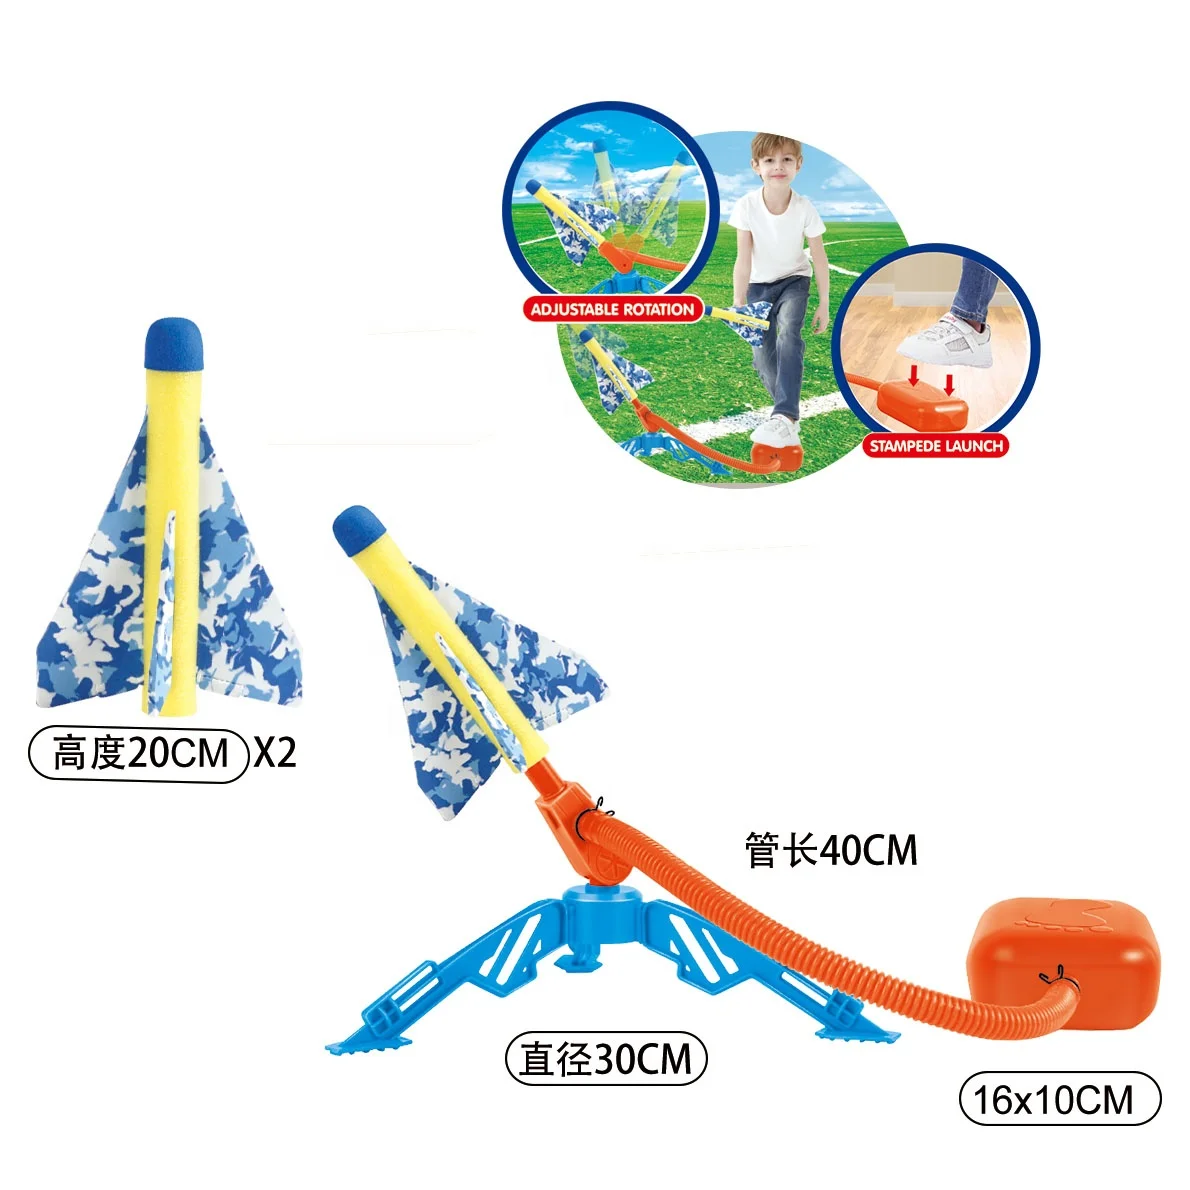 Details about   CPSYUB Kids Toys 4, Shoot up to 100 Feet Rocket Launcher Toys with 8 Rockets 